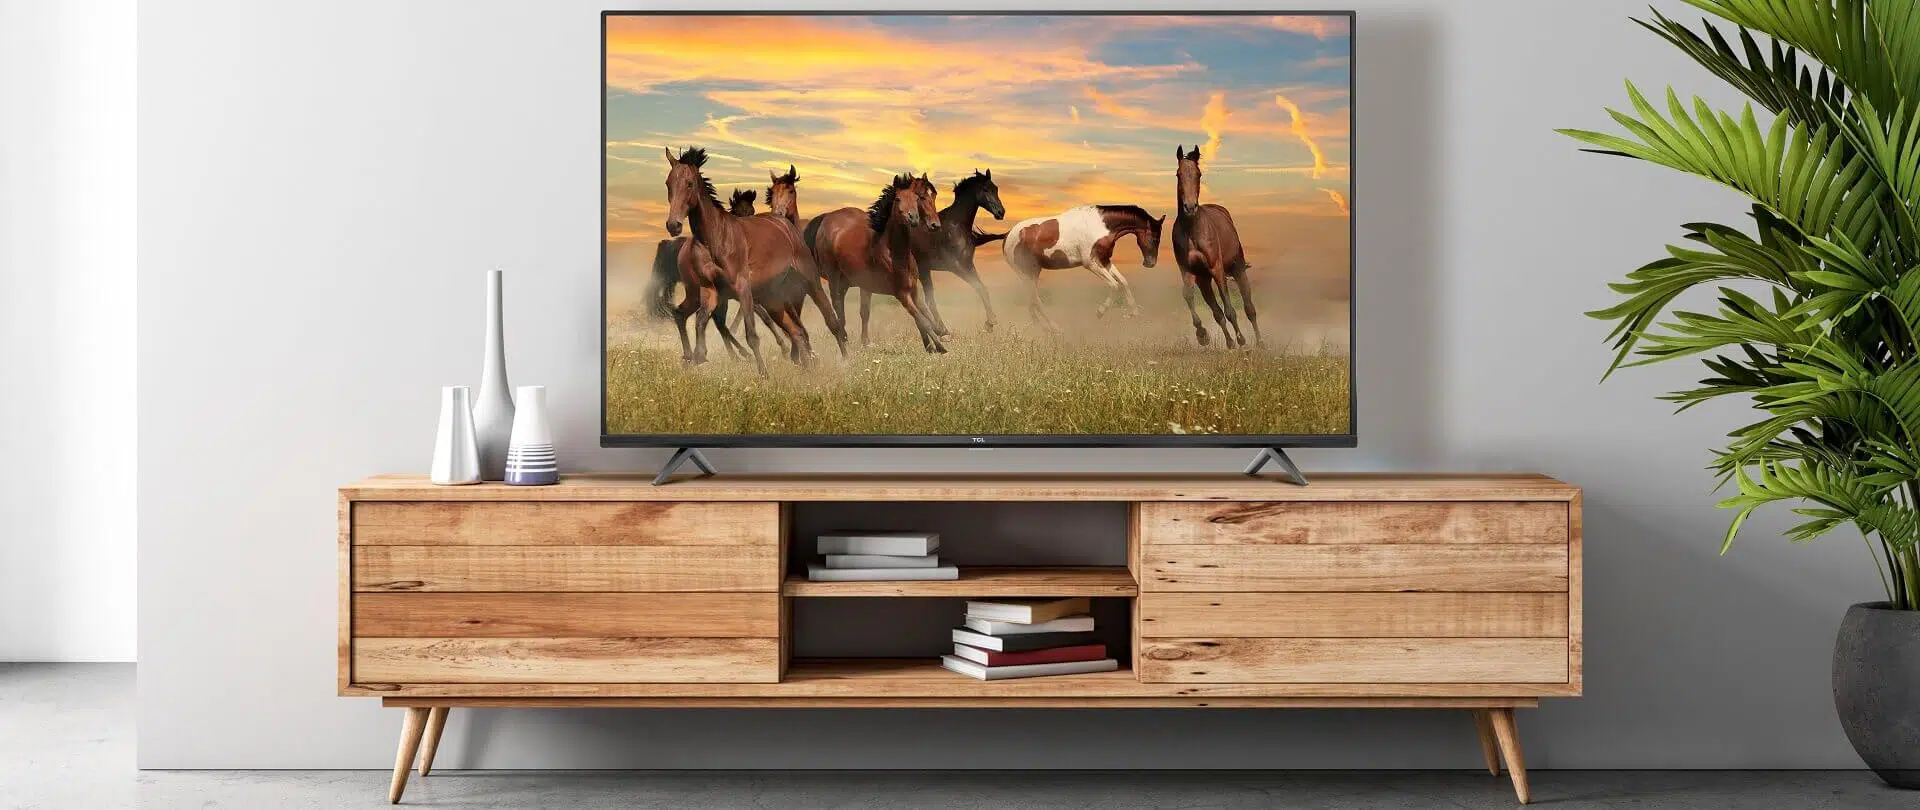 How To Watch Free TV On Smart TV